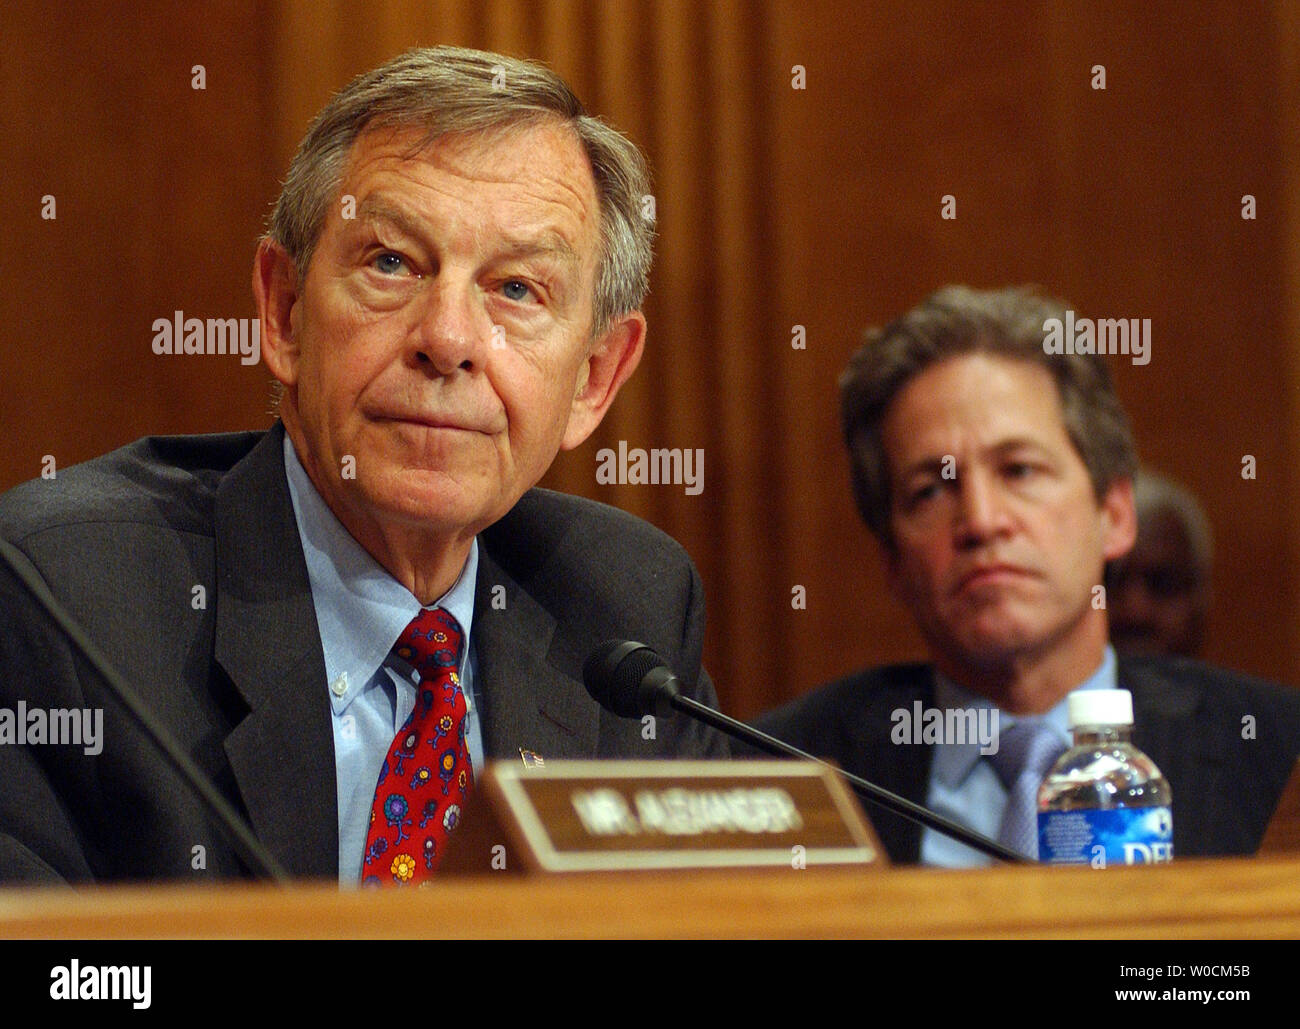 Sen. George Voinovich, R-OH, and Sen. Norm Coleman, R-MN, listen during a Senate Foreign Relations Committee meeting to vote on the nomination of John Bolton to be the U.S. ambassador to the U.N. on May 12, 2005, on Capitol Hill in Washington. Voinovich continues to oppose the nomination despite pressure from his party to support the President's choice.     (UPI Photo/Roger L. Wollenberg) Stock Photo